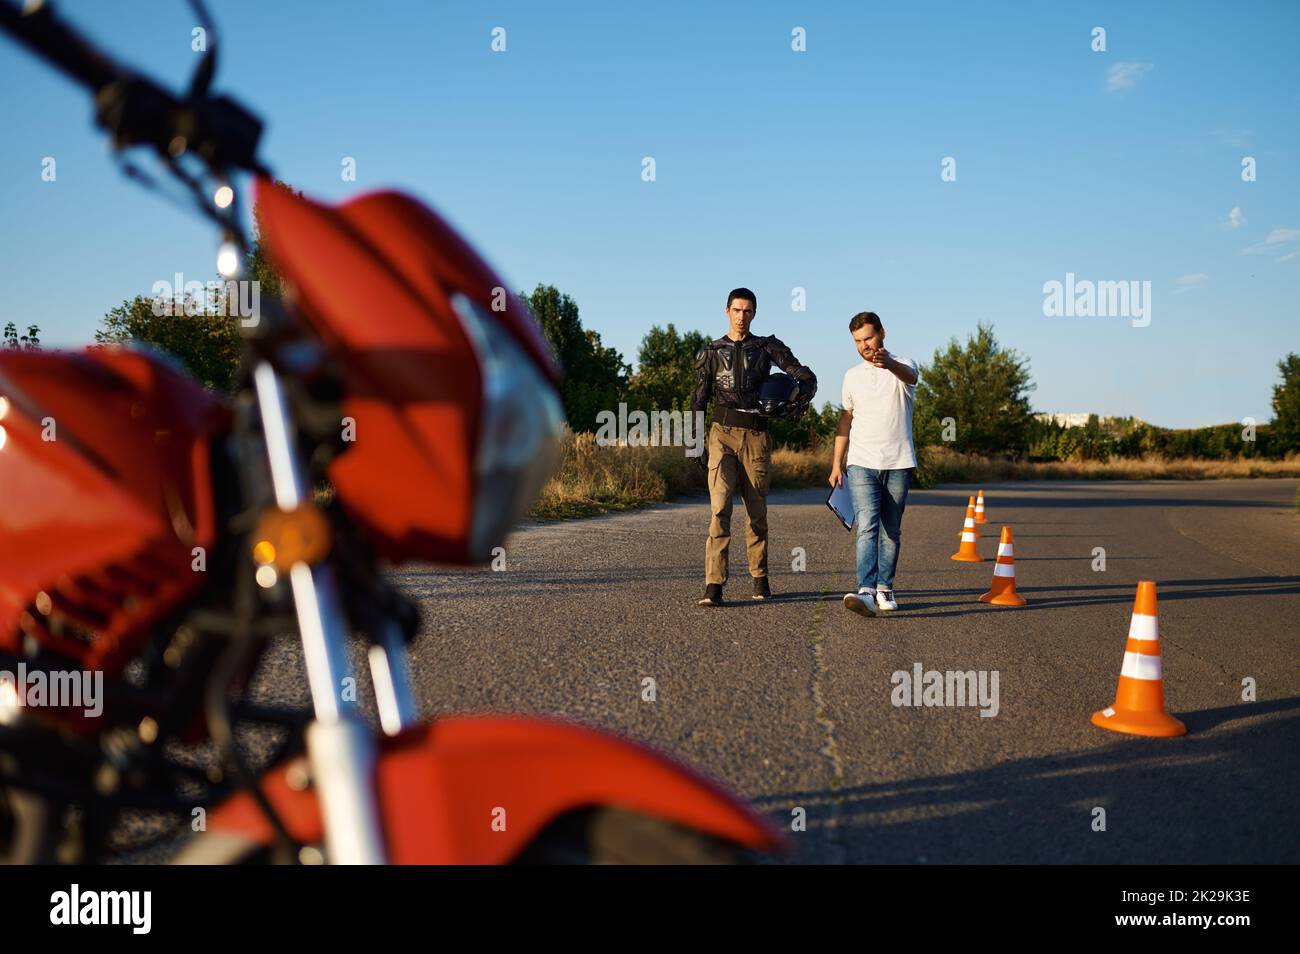 Motorbike, driving lesson, motorcycle school Stock Photo